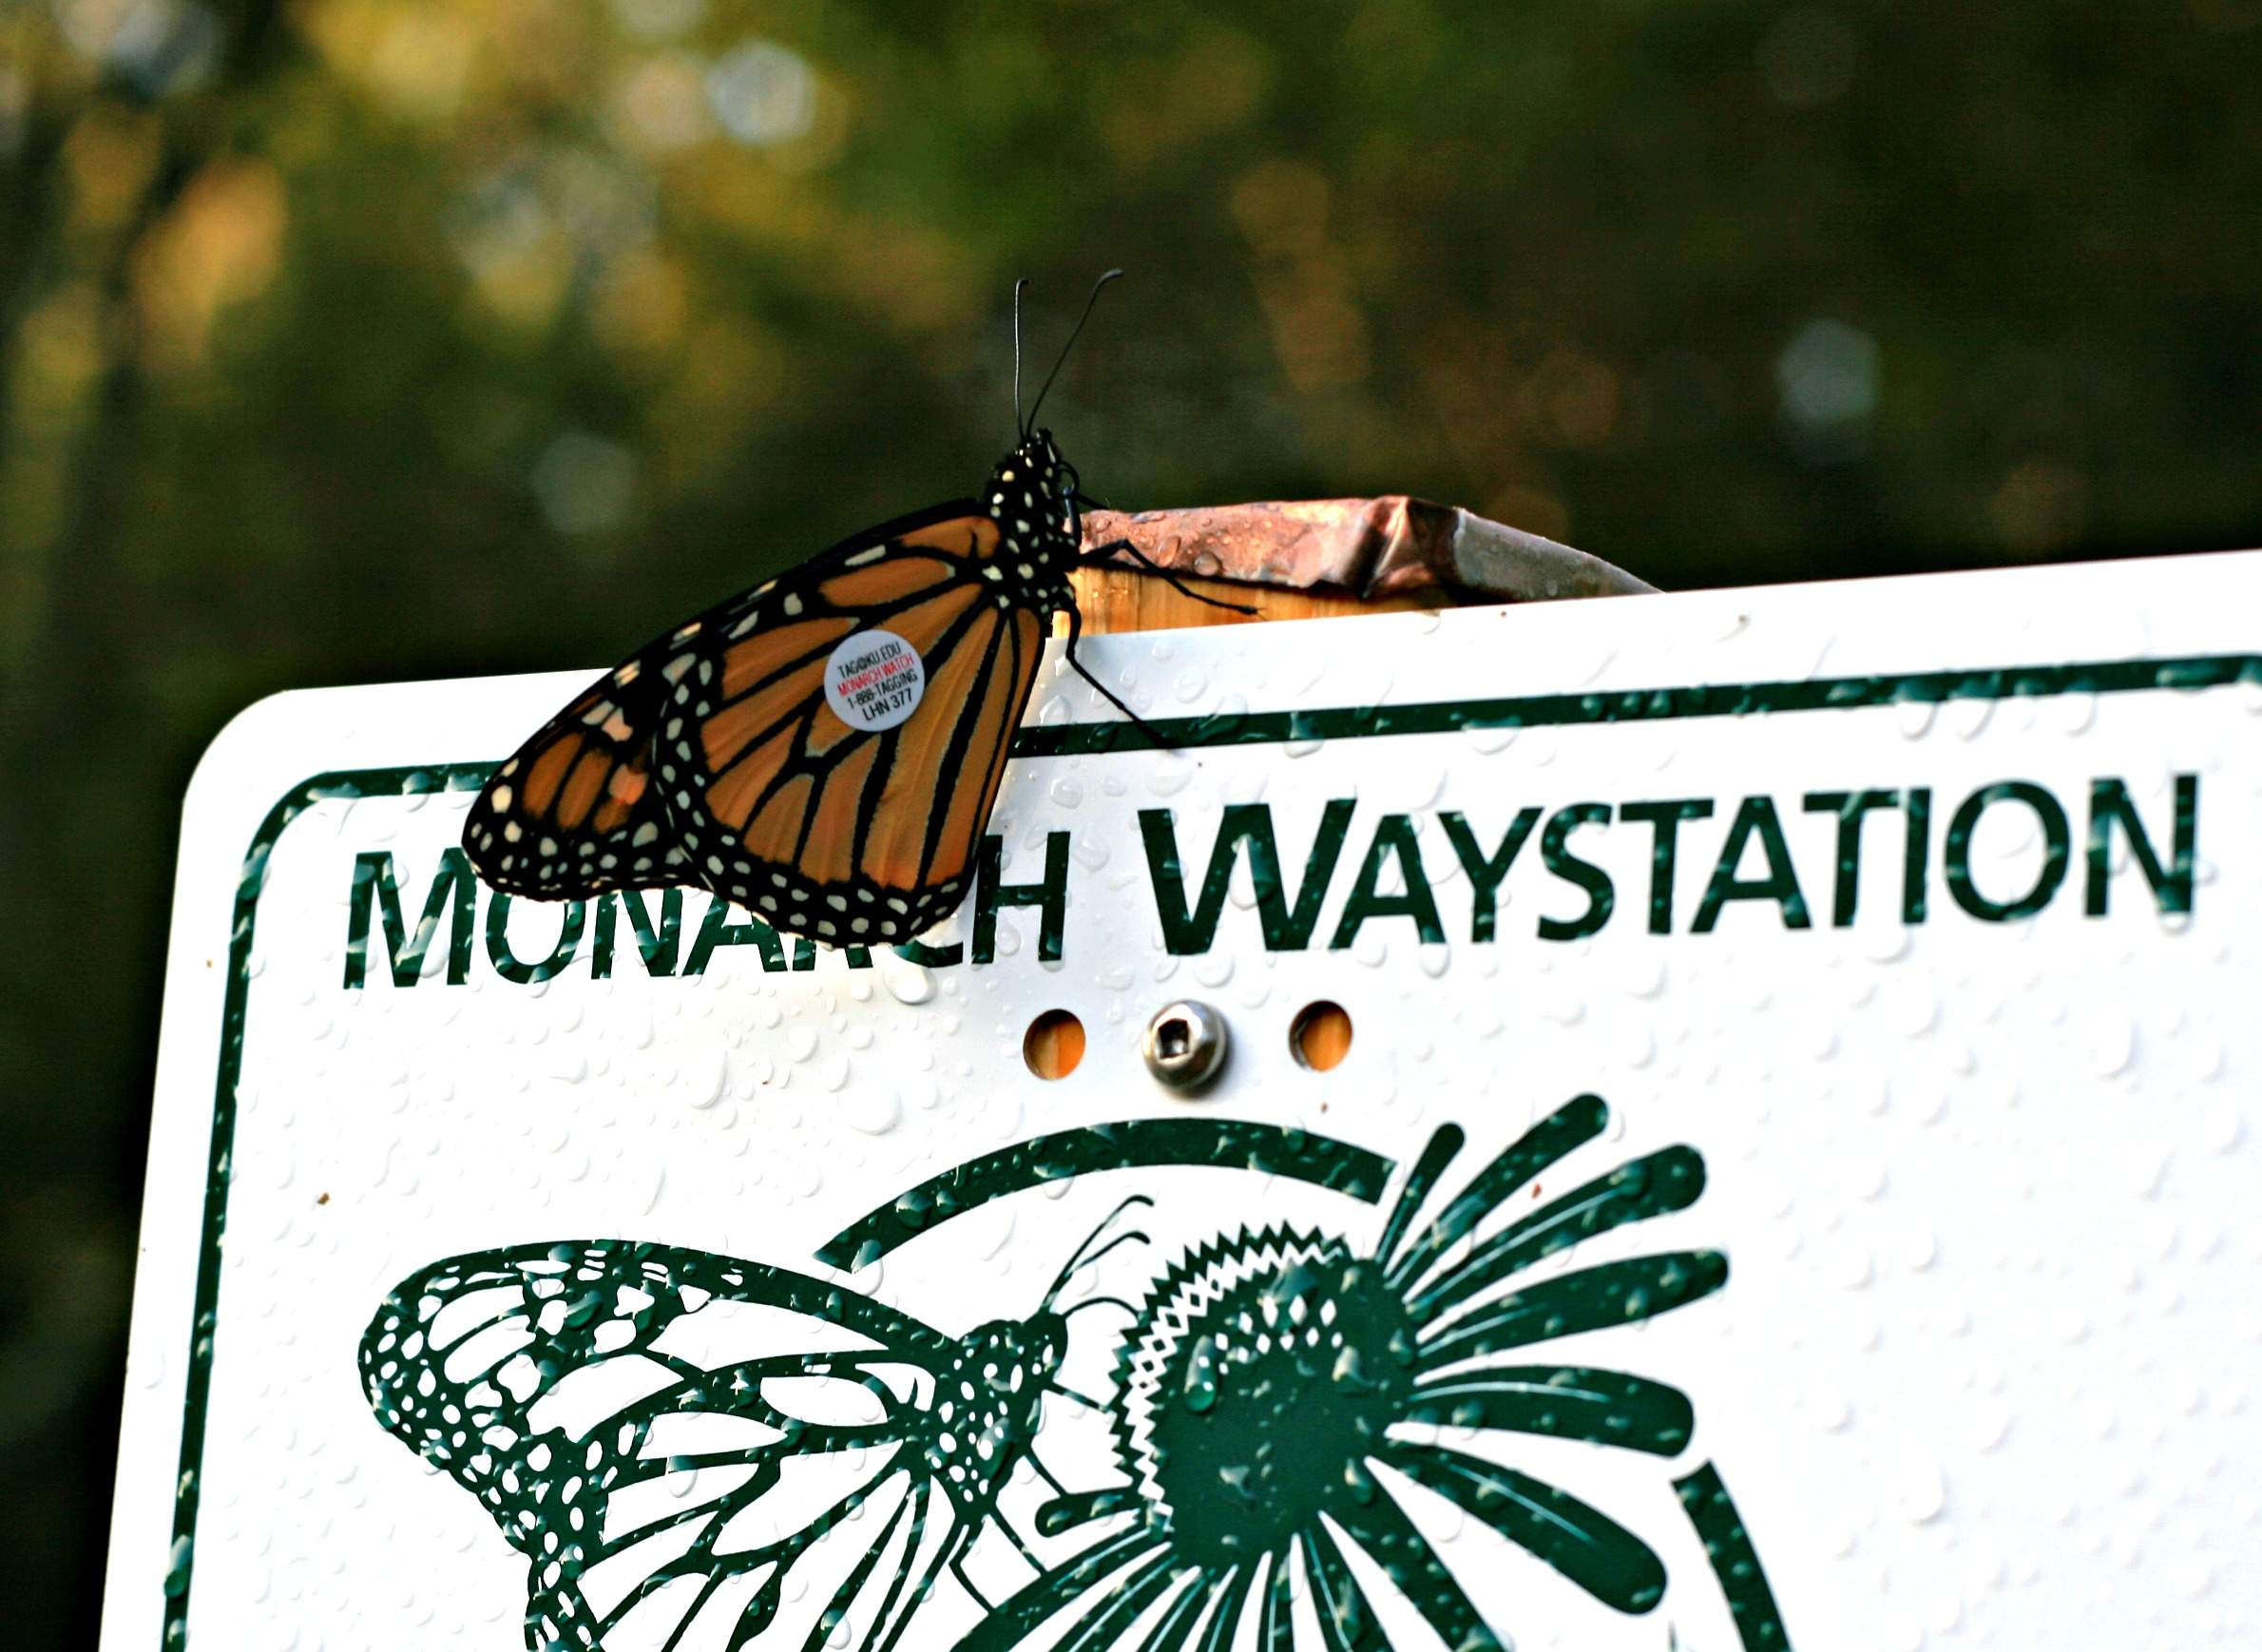 Experts Seek Help to Save Eastern Monarch Butterfly From